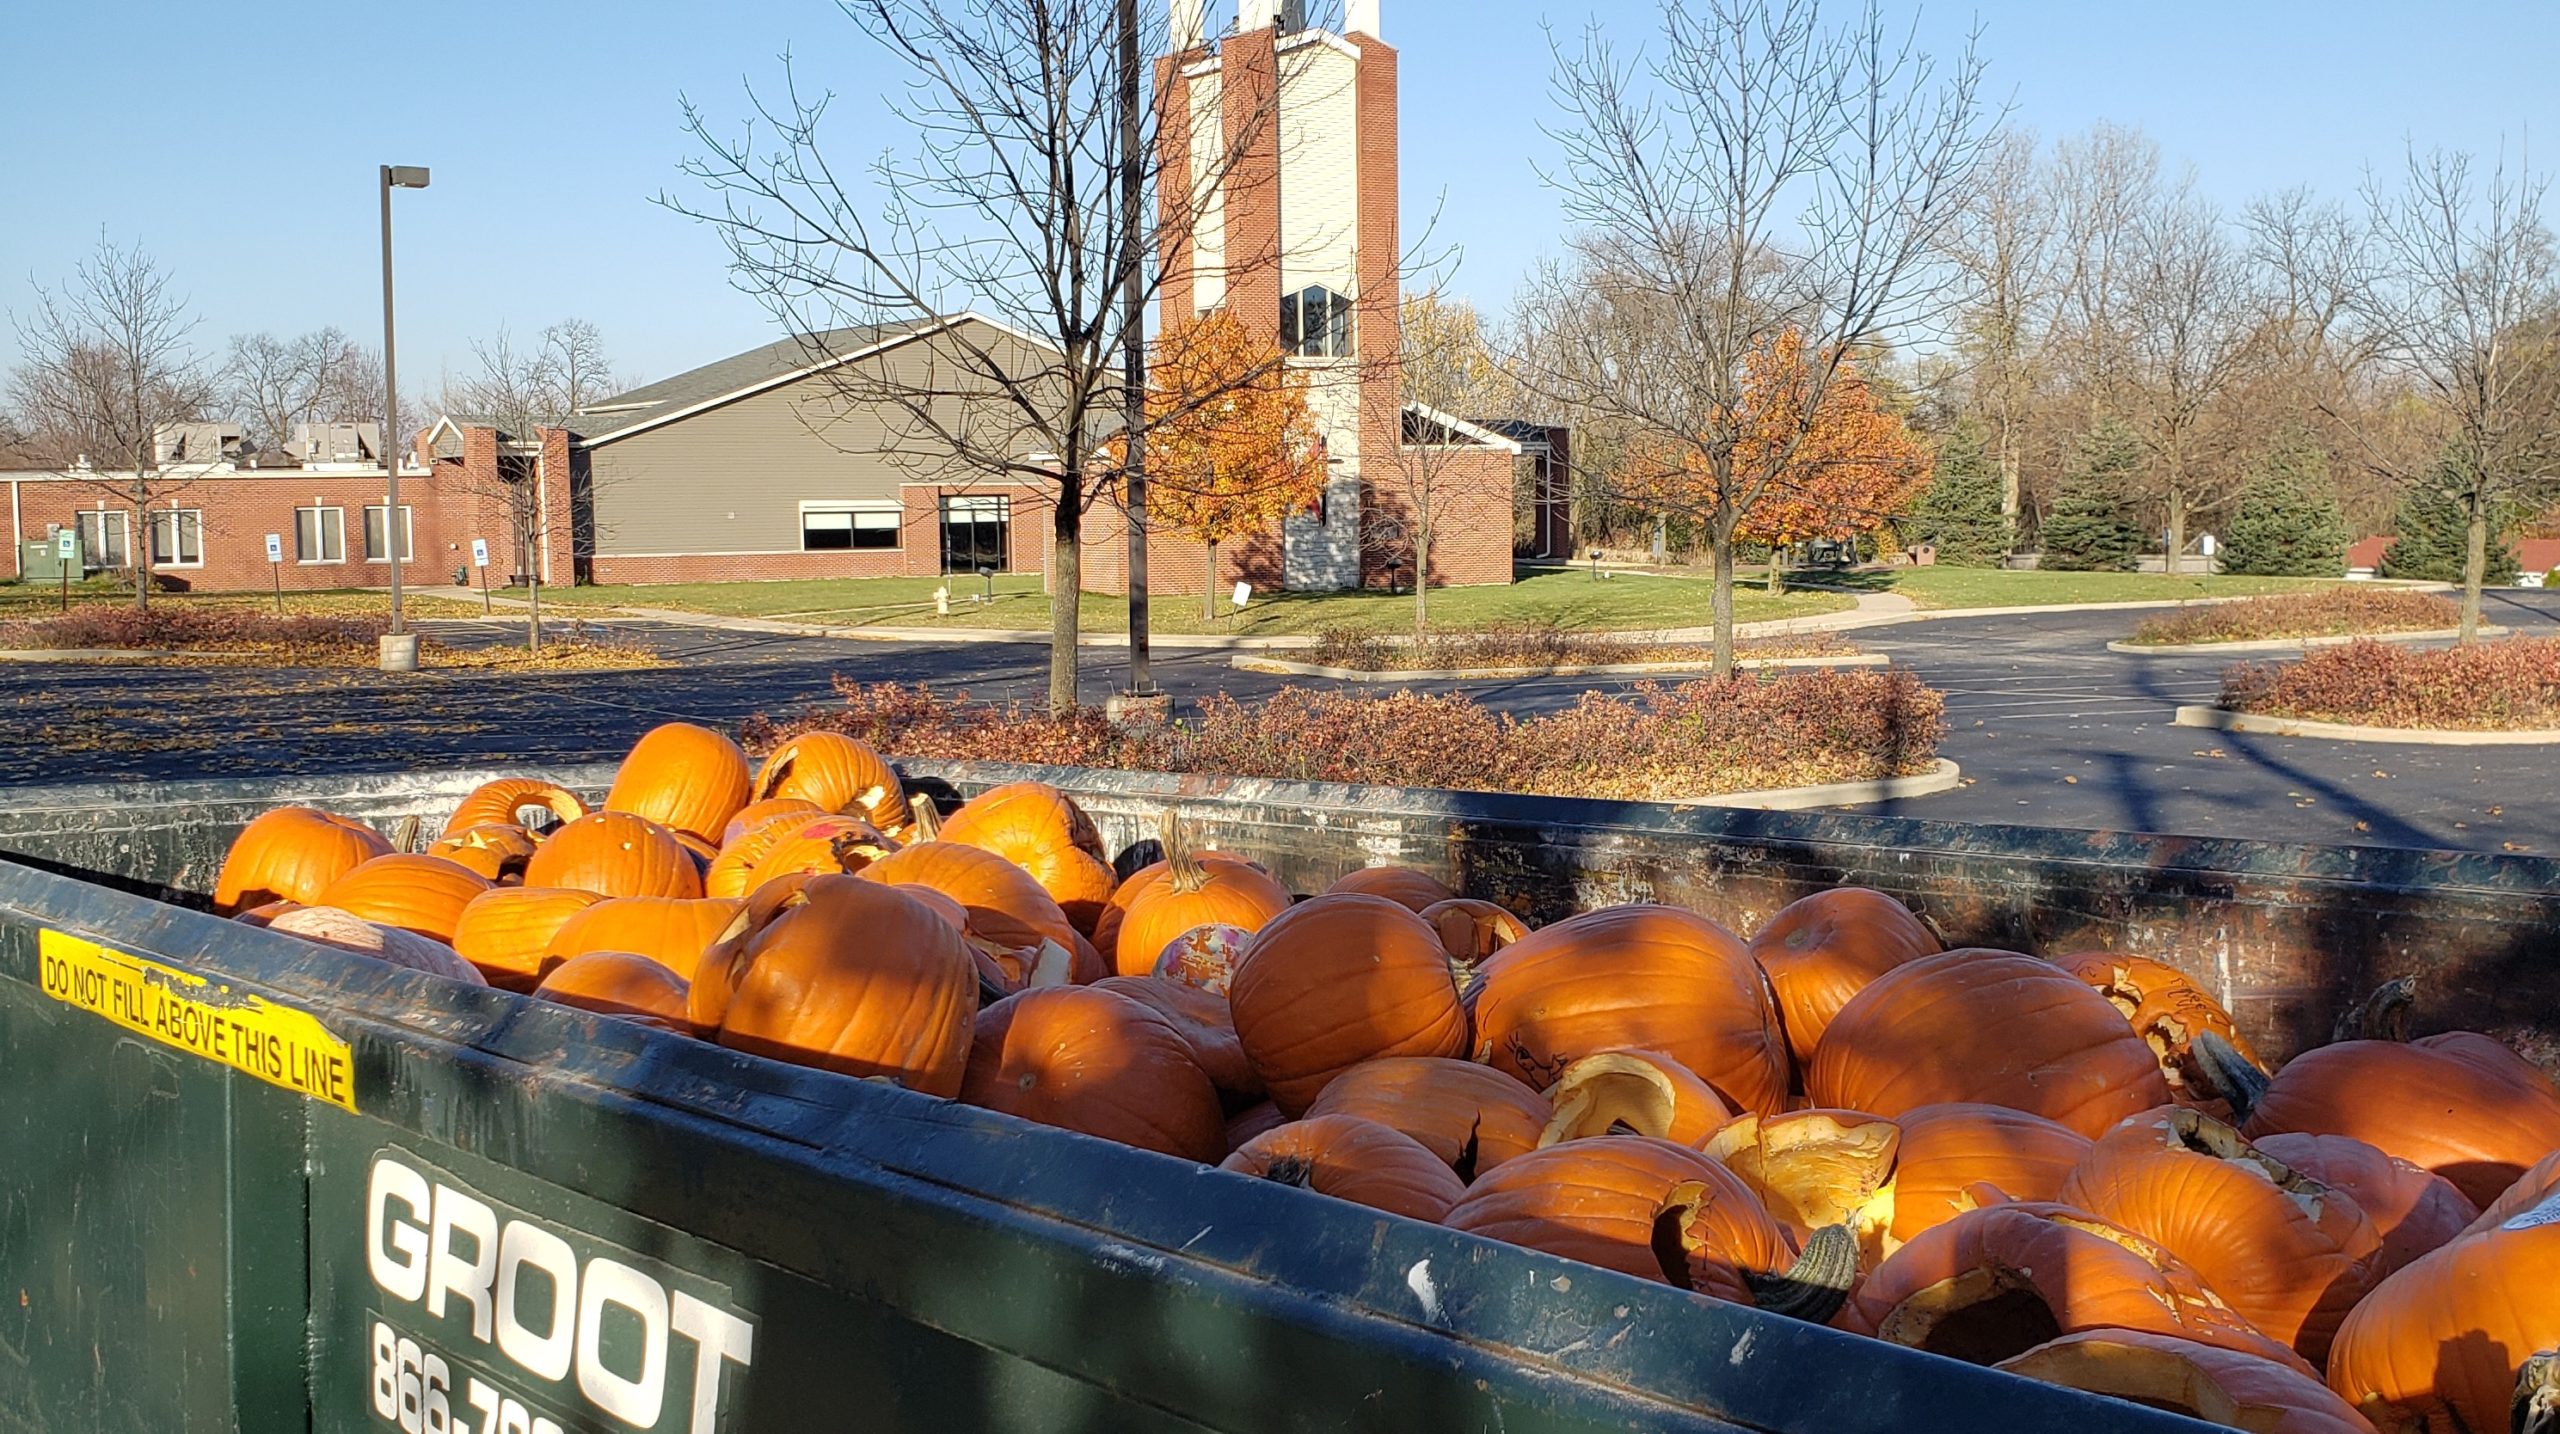 Groot dumpster filled with pumpkins in foreground with First United Methodist Church in the background